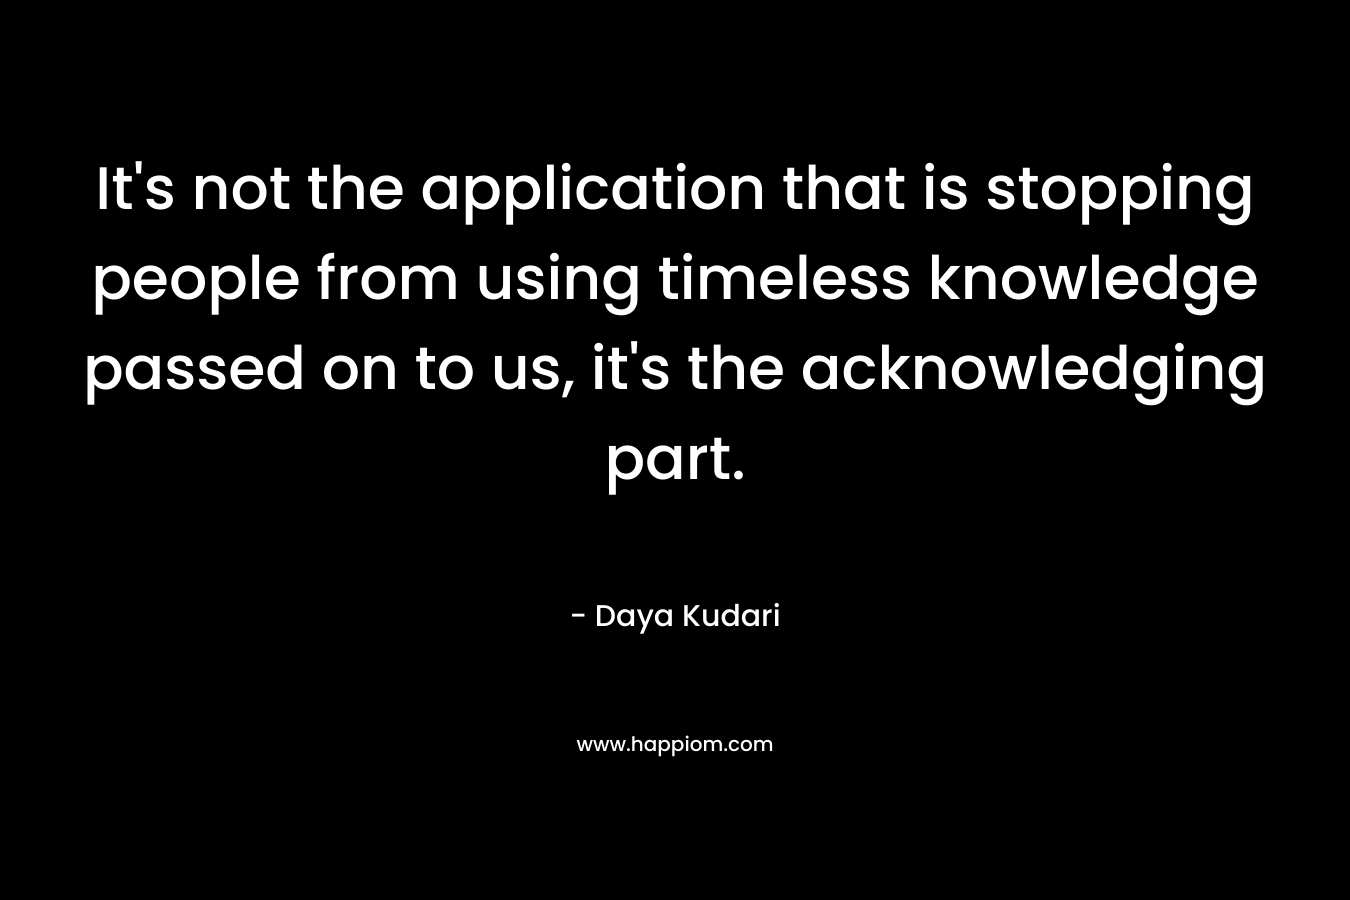 It’s not the application that is stopping people from using timeless knowledge passed on to us, it’s the acknowledging part. – Daya Kudari